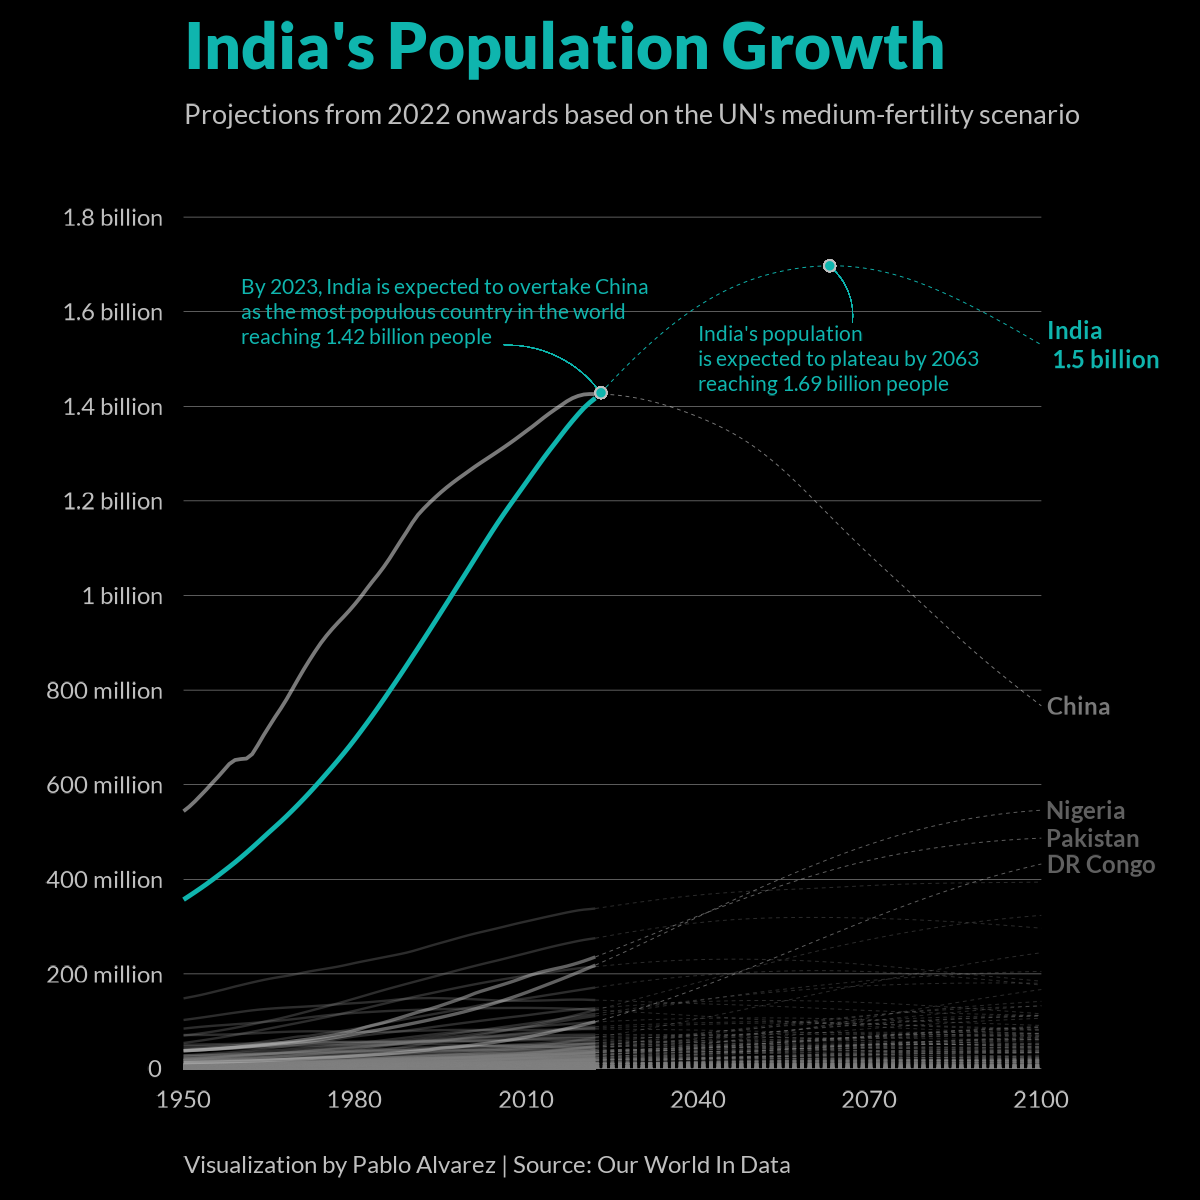 Charting out India's population growth over the years